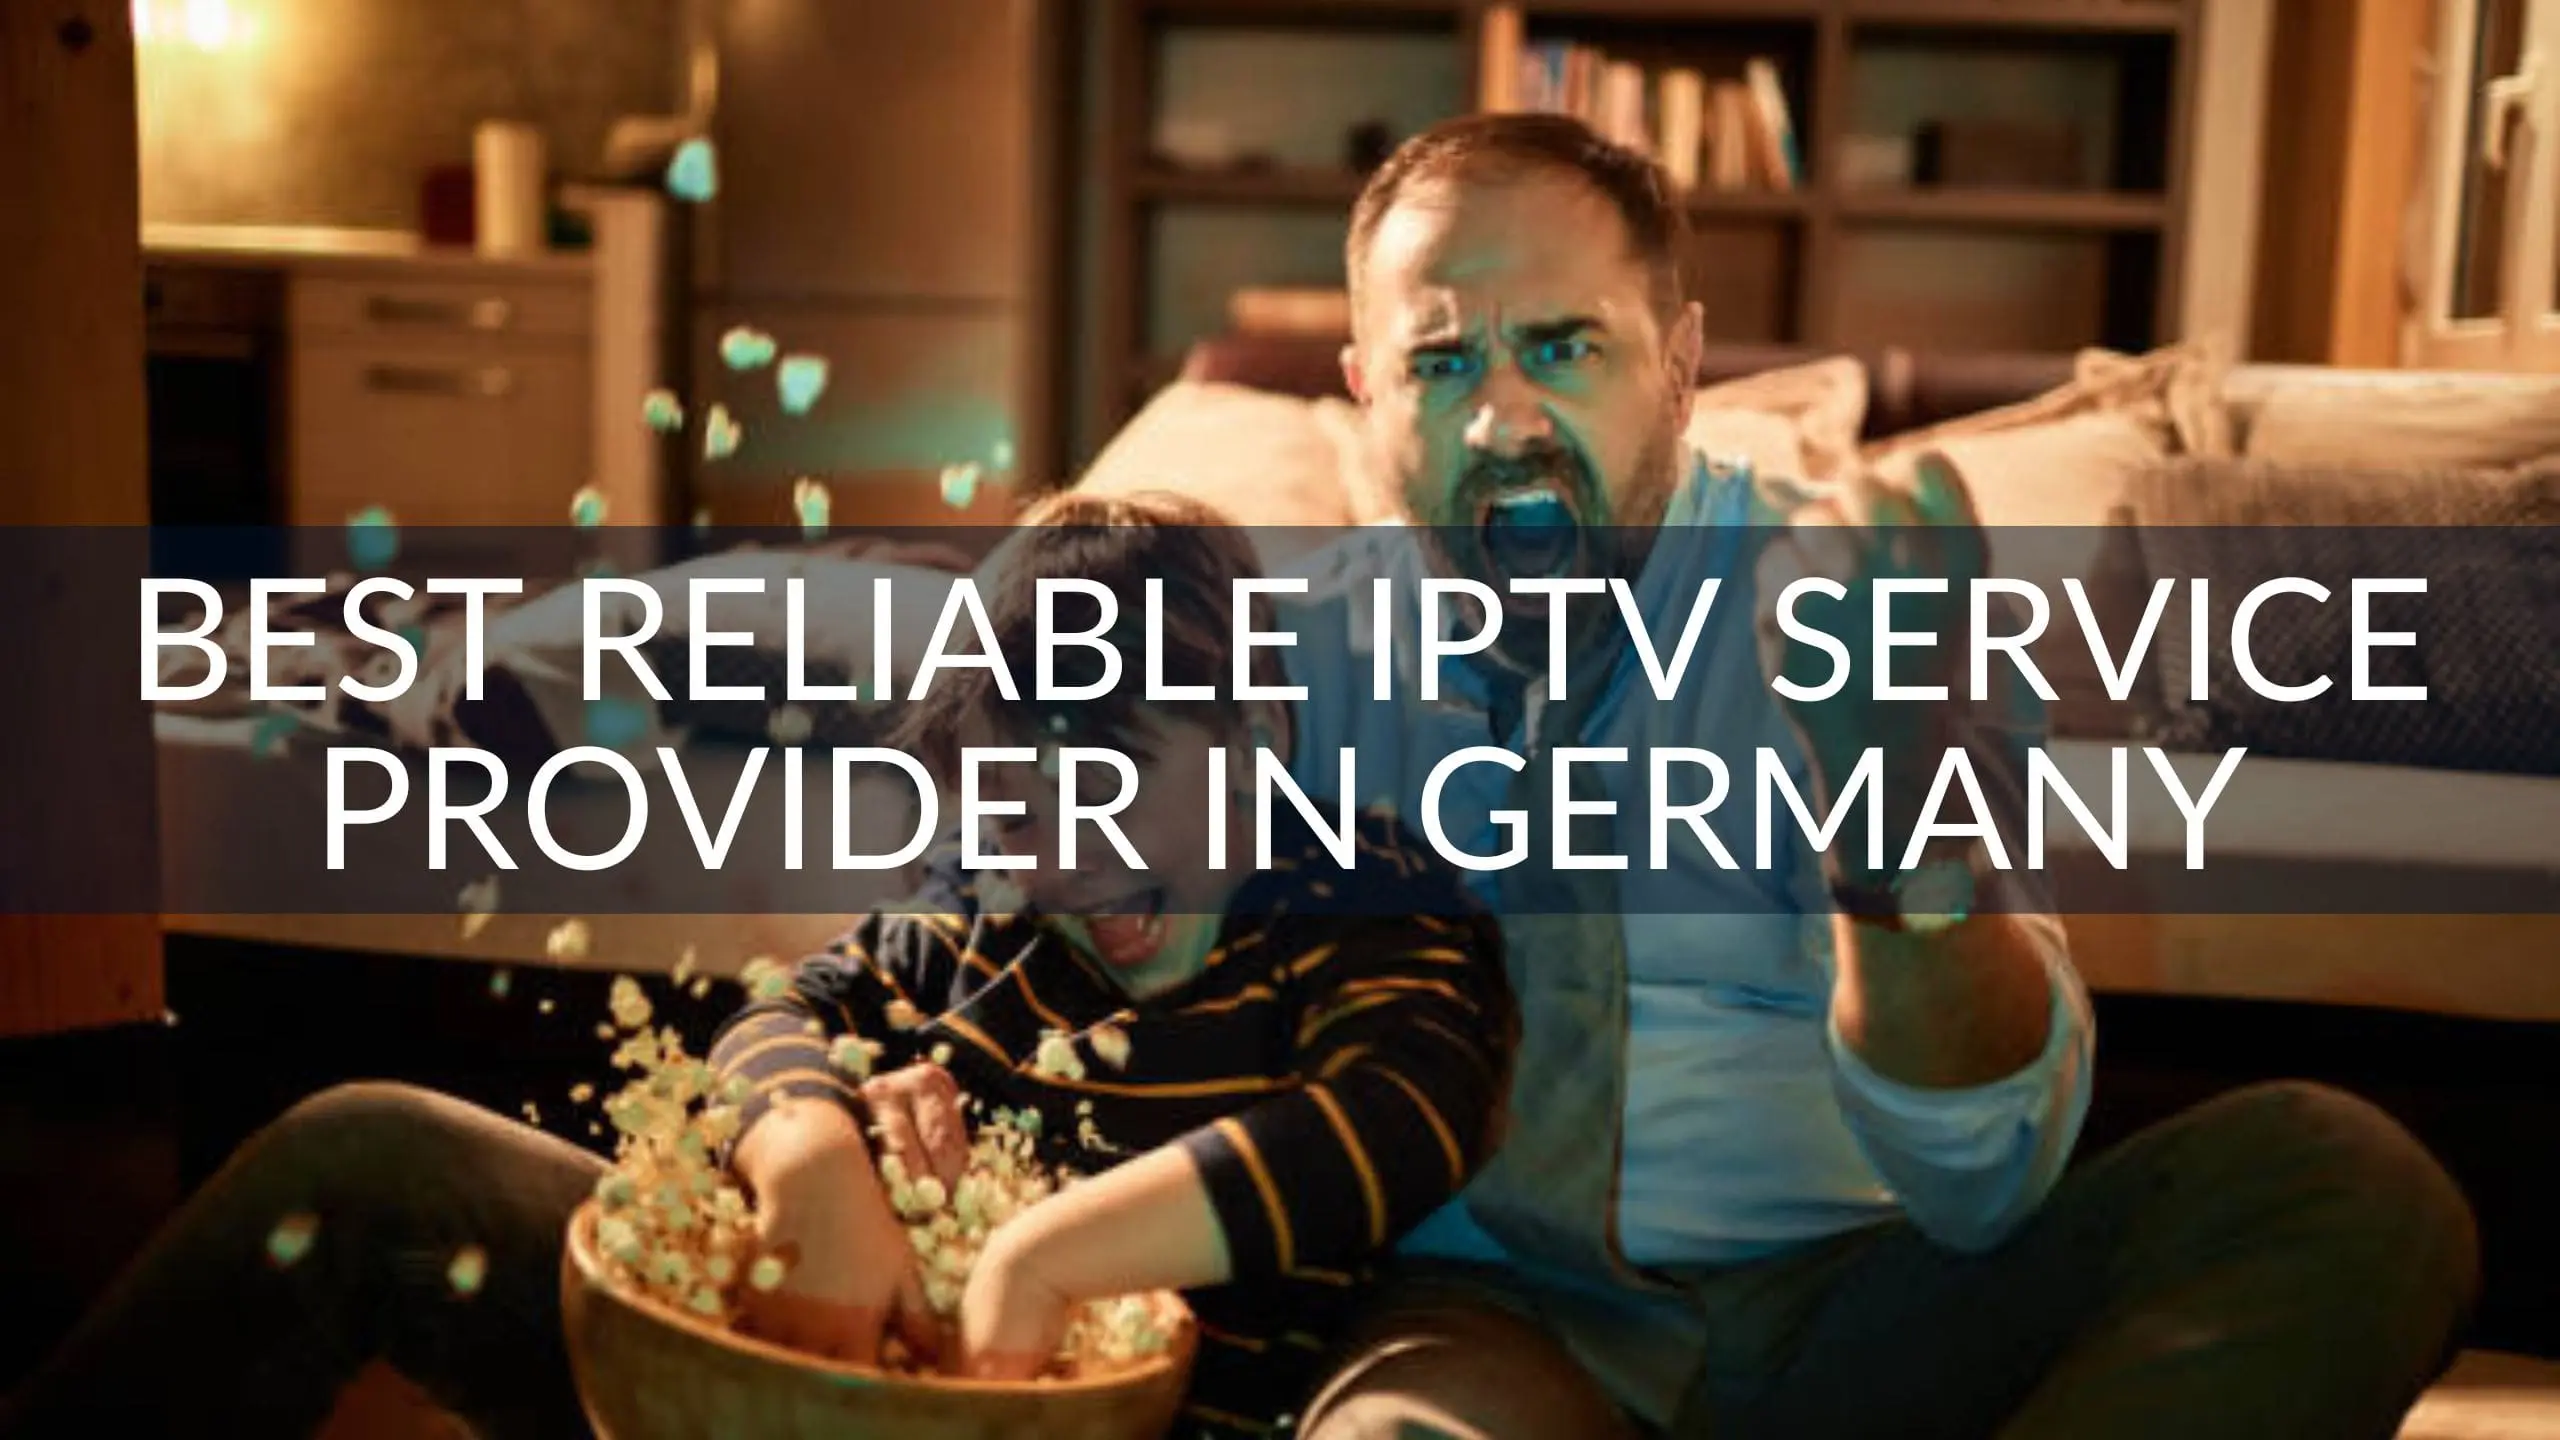 Best Reliable IPTV Service Provider in Germany